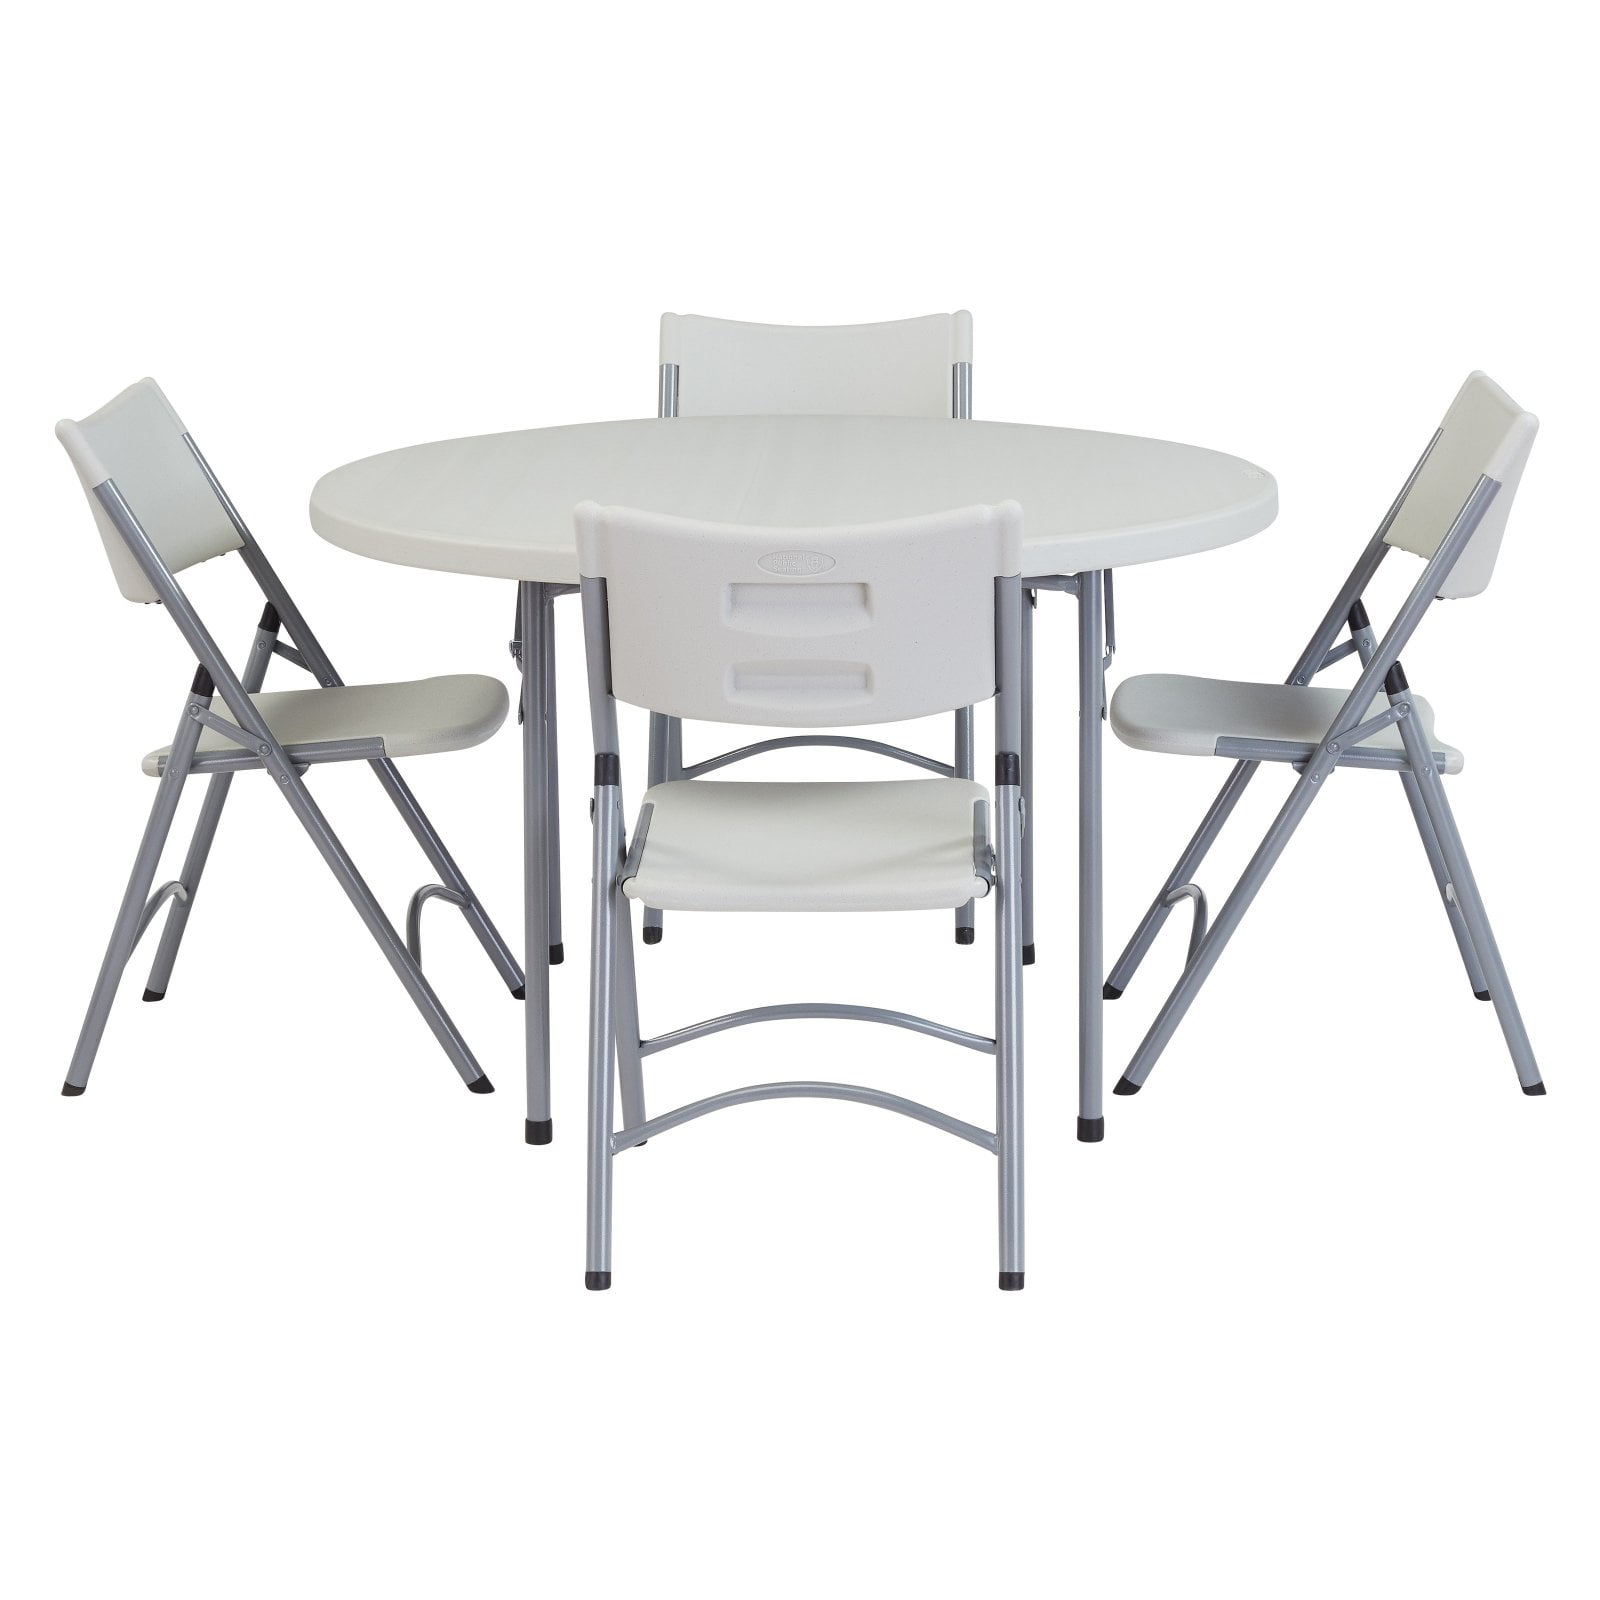 National Public Seating 4 ft. Round Heavy Duty Folding Table and 4 Heavy Duty Plastic Folding